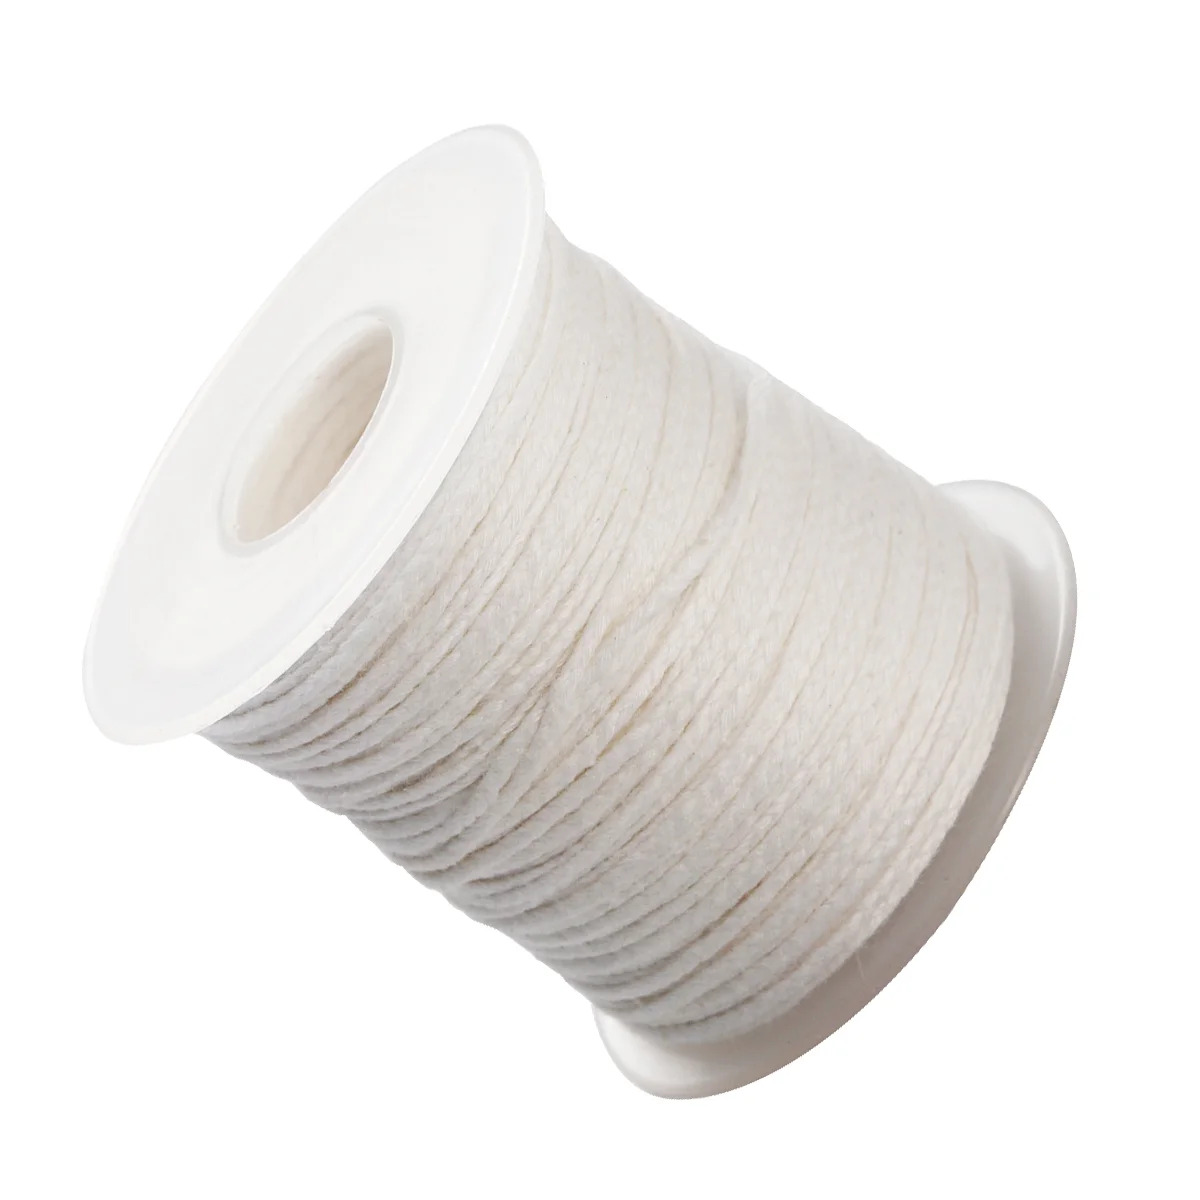 

Wicks Wickmaking Cotton Spool Braided Diy Roll Lamp Replacement Natural Oilrope Material Candlemaking Fiberglass Beeswax Wax